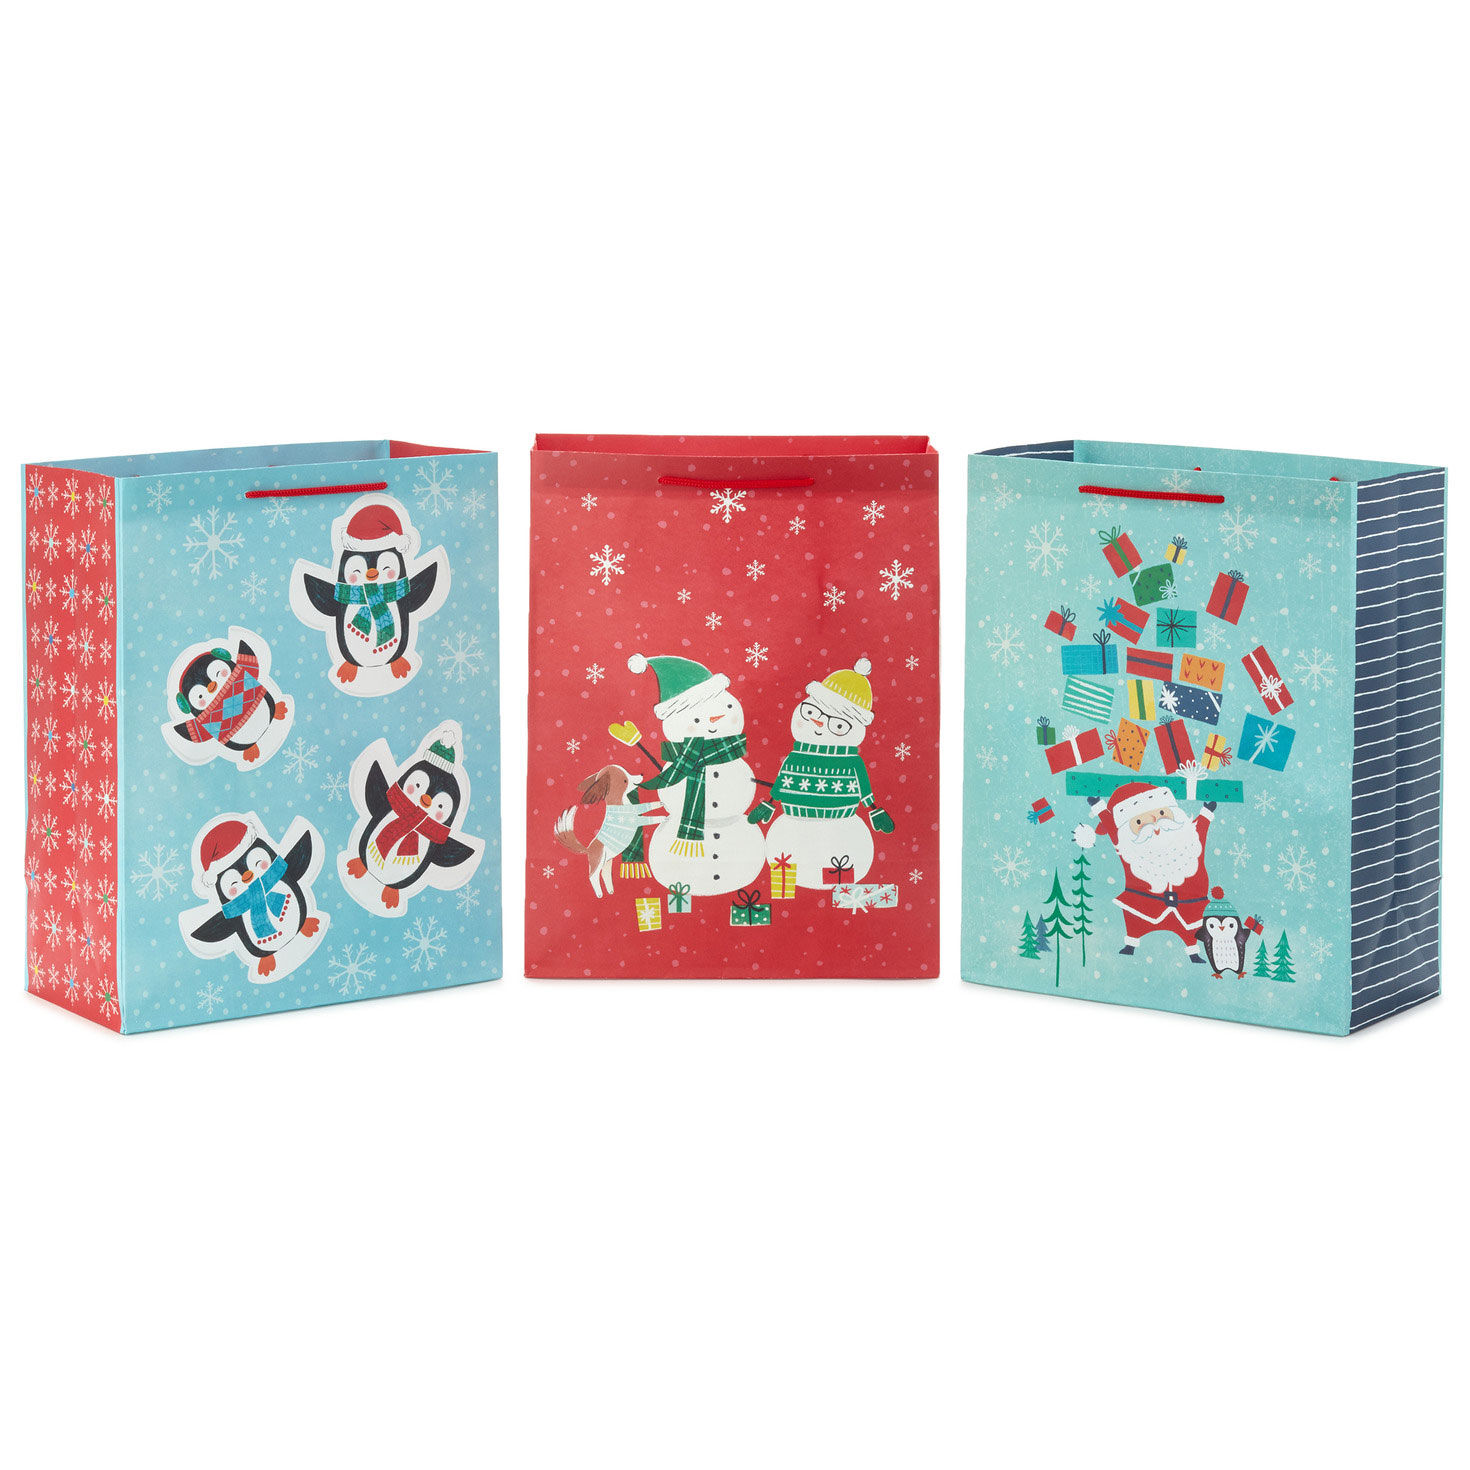 13" Winter Fun 3-Pack Assortment Large Christmas Gift Bags for only USD 7.99 | Hallmark